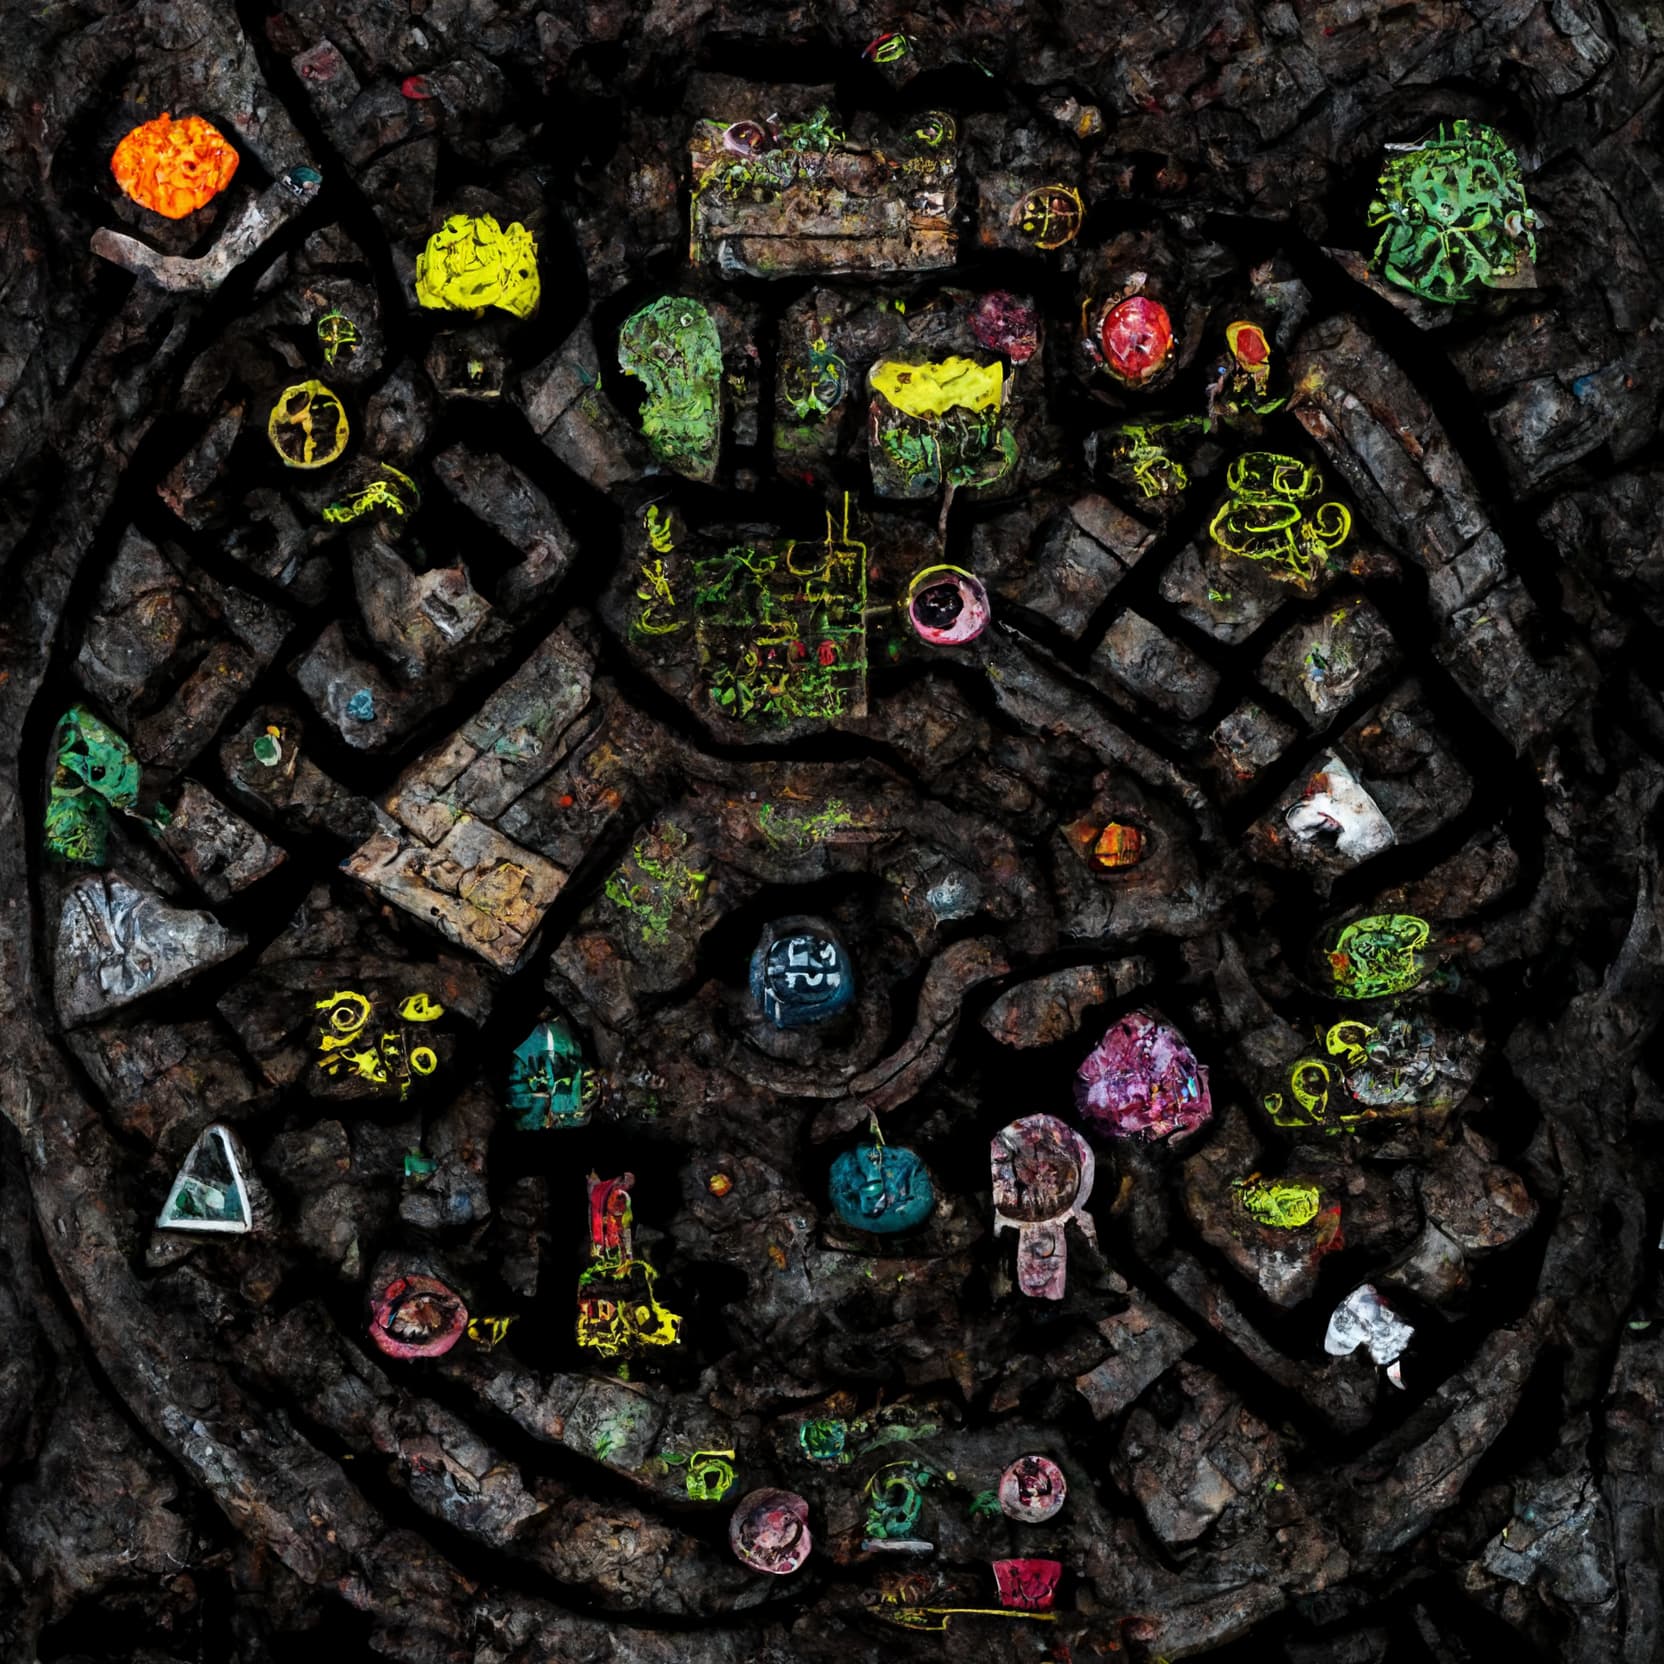 270ccf02-4faf-4ce4-8719-1d59189a2c0e_Gardens_usable_coloured_megadungeon_map_annotated_with_traps_and_monster_symbols_and_surrounding_environment